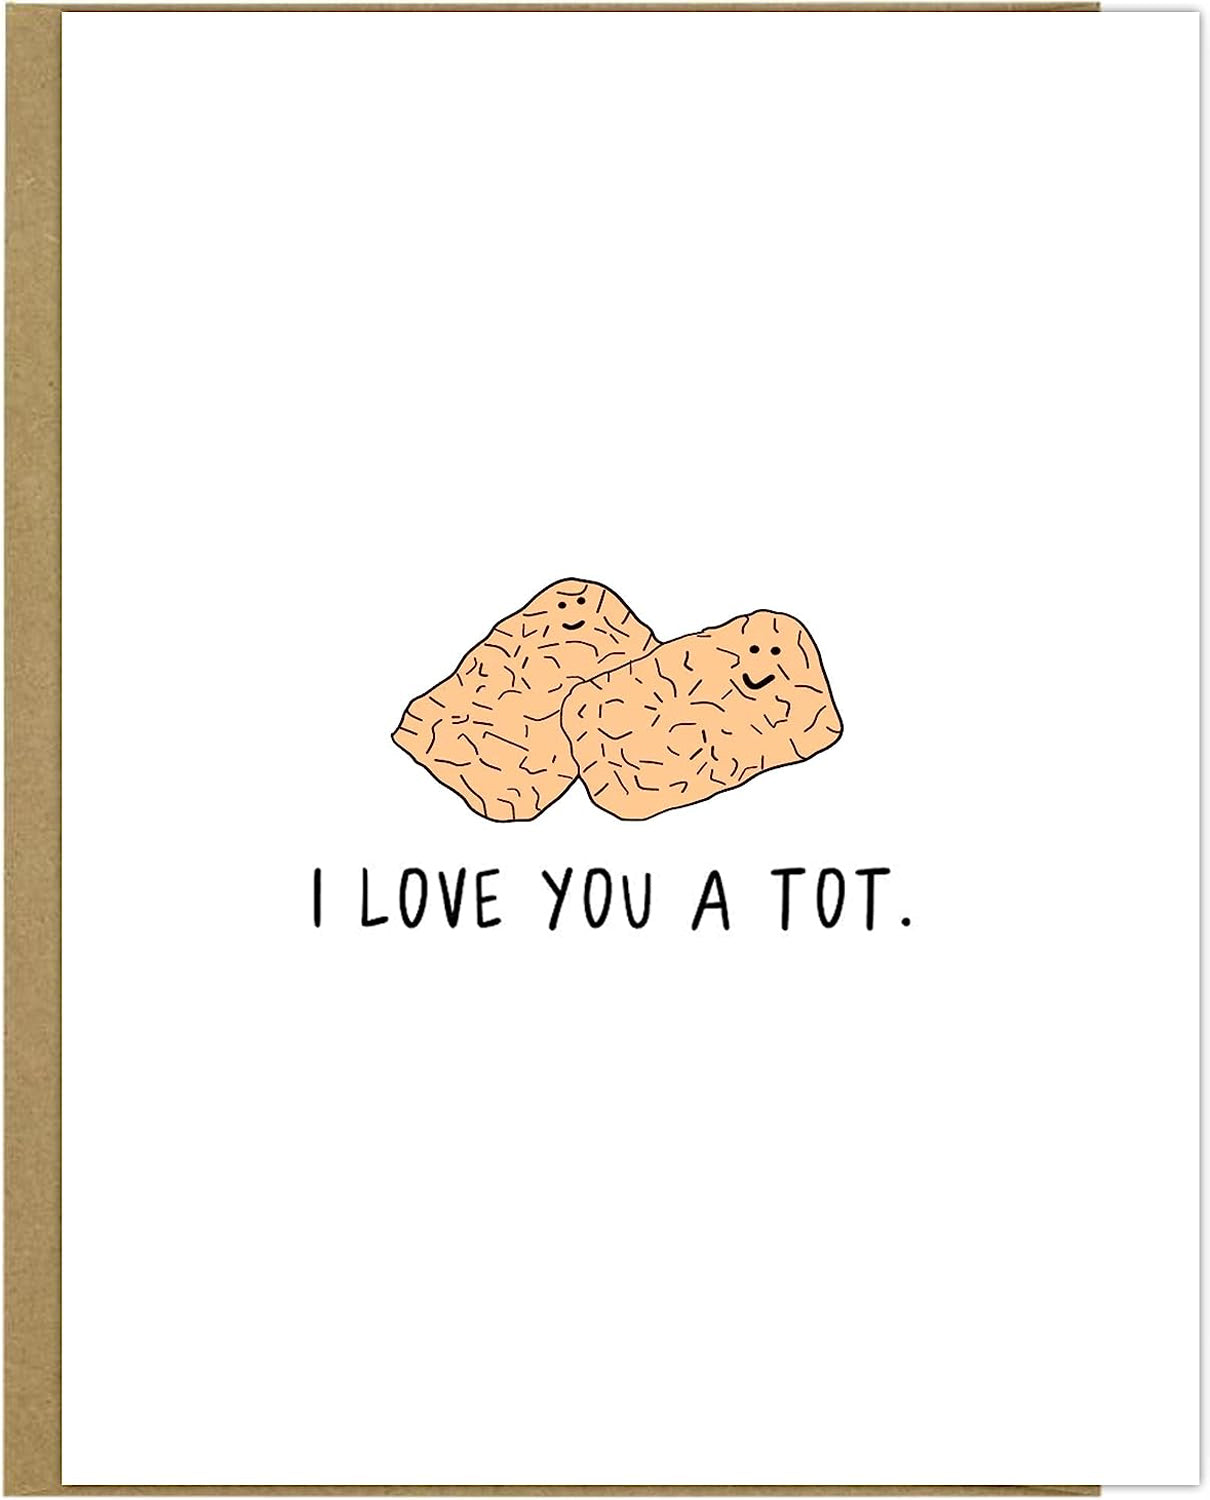 This "Love You A Tot Card" greeting card from rockdoodles is perfect for expressing your affection. With a blank inside, you can customize your heartfelt message.